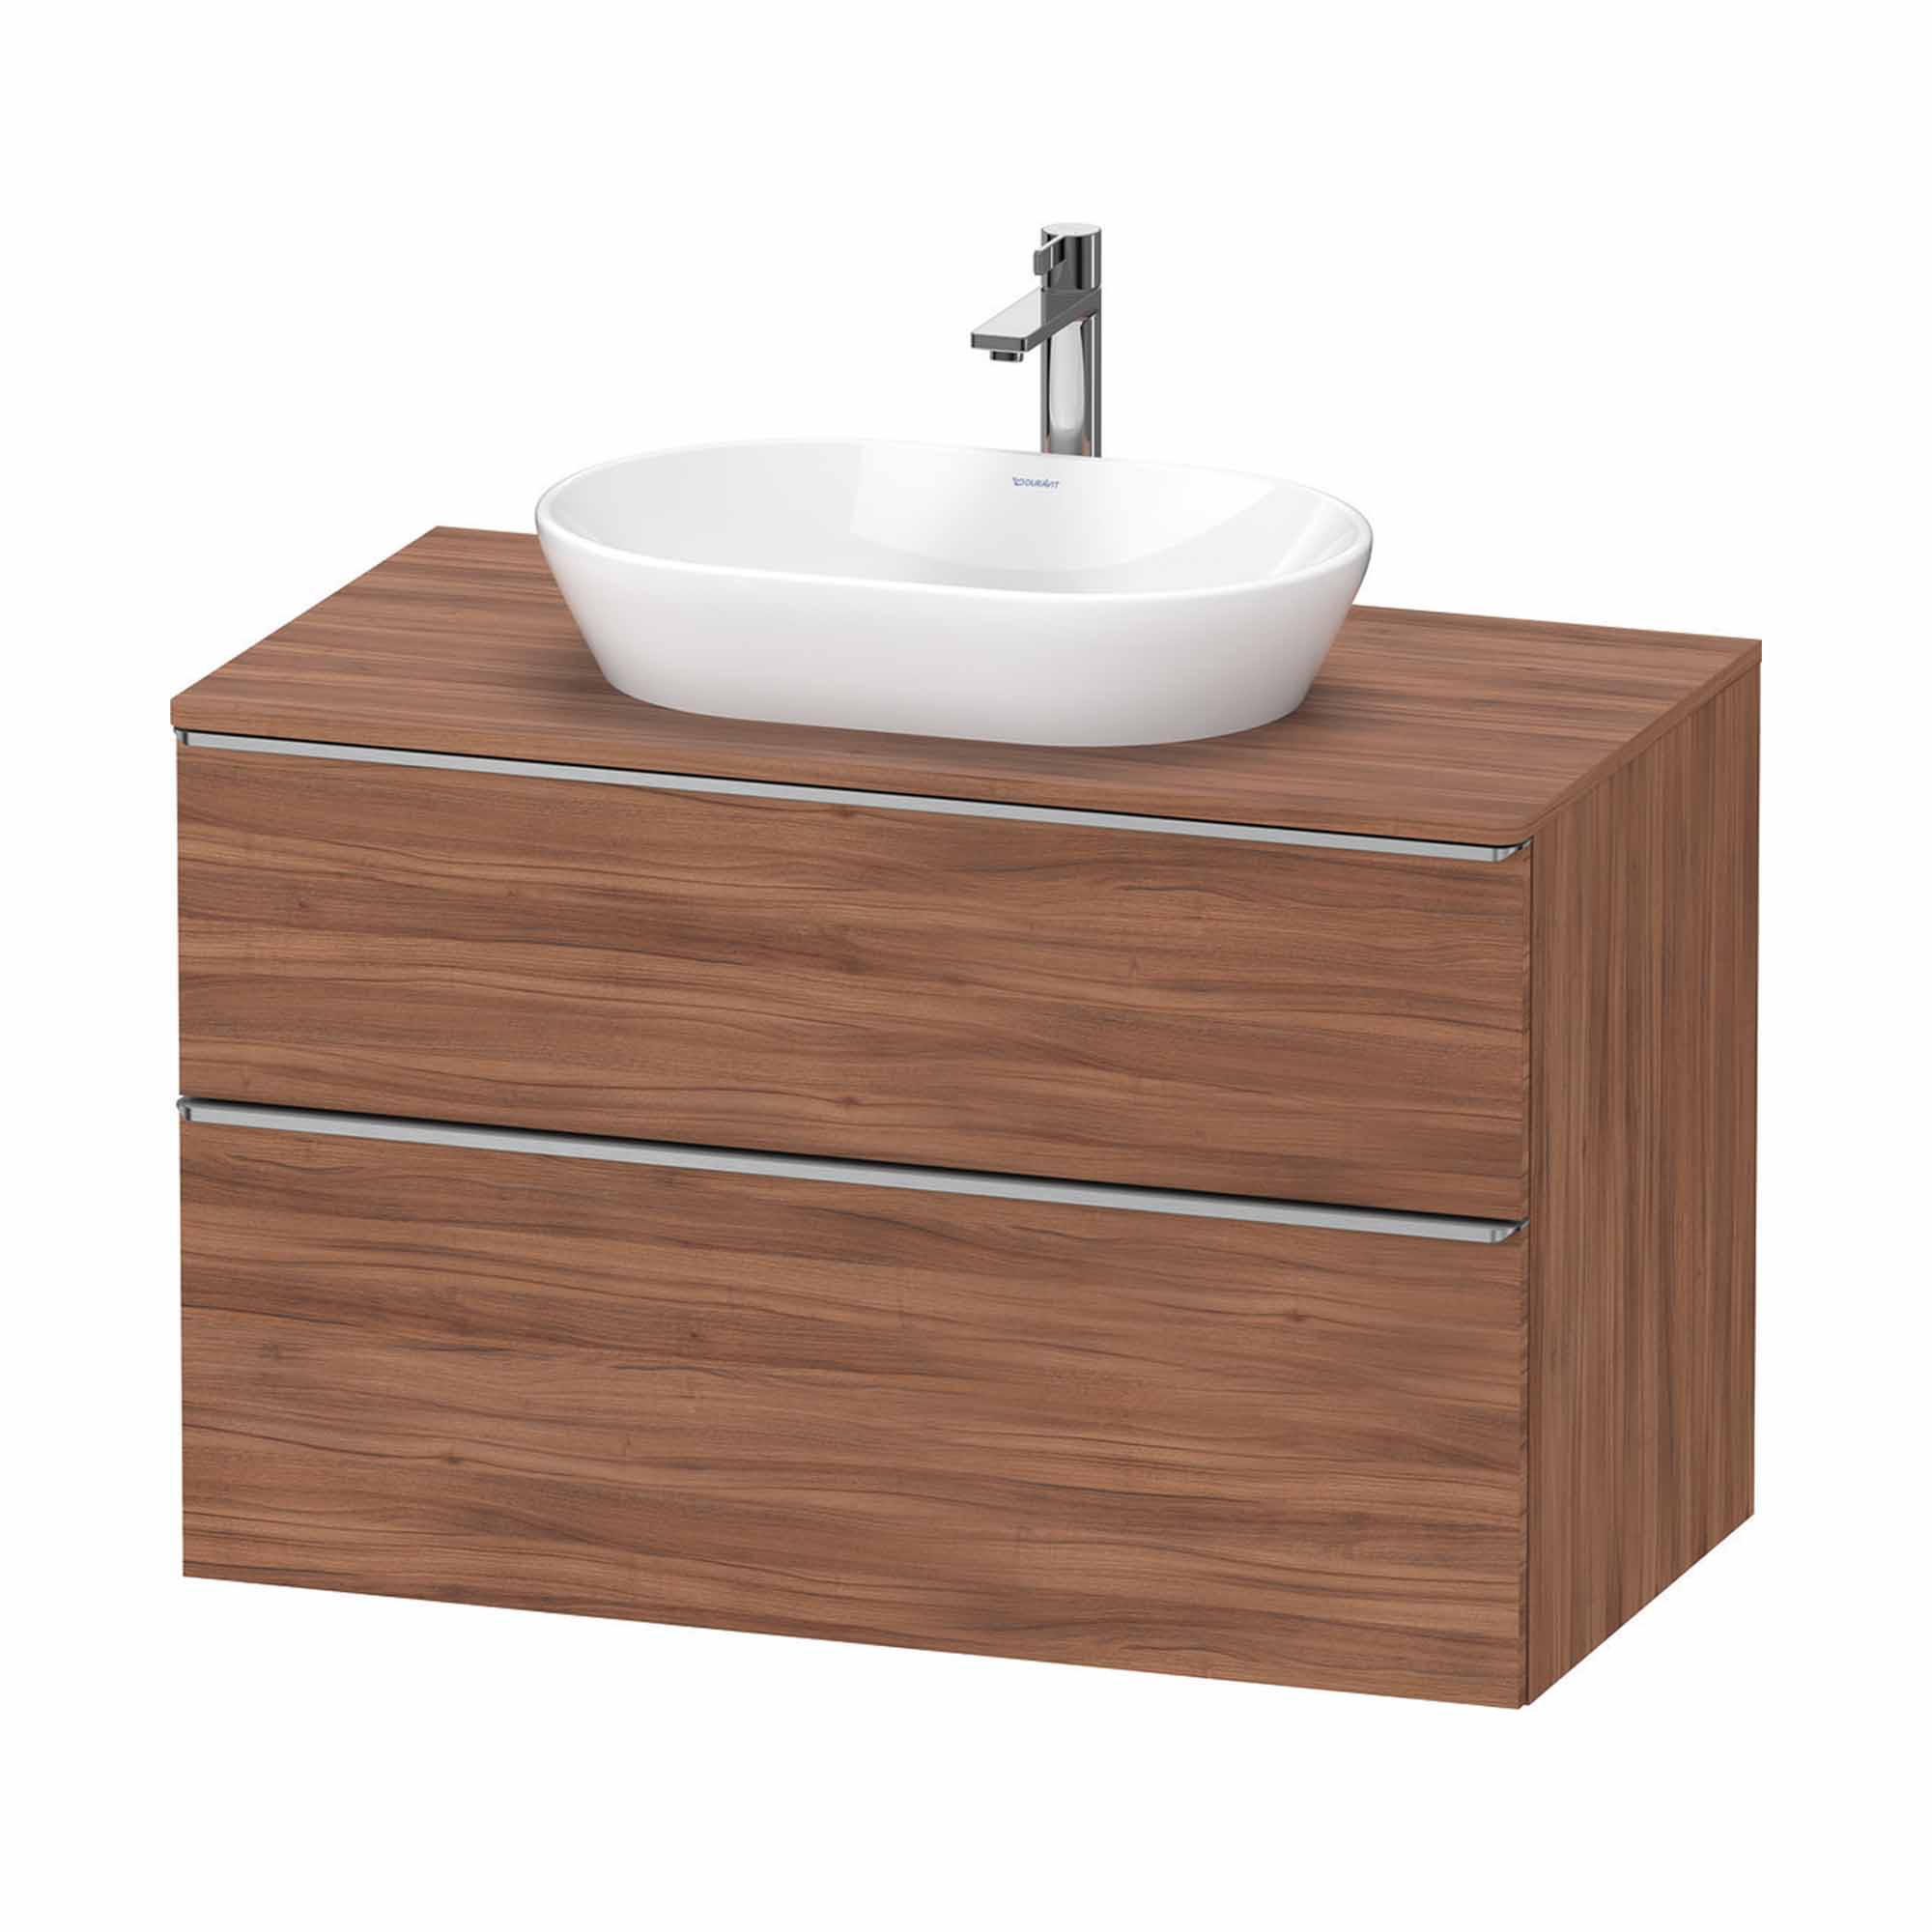 duravit d-neo 1000 wall mounted vanity unit with-worktop walnut stainless steel handles